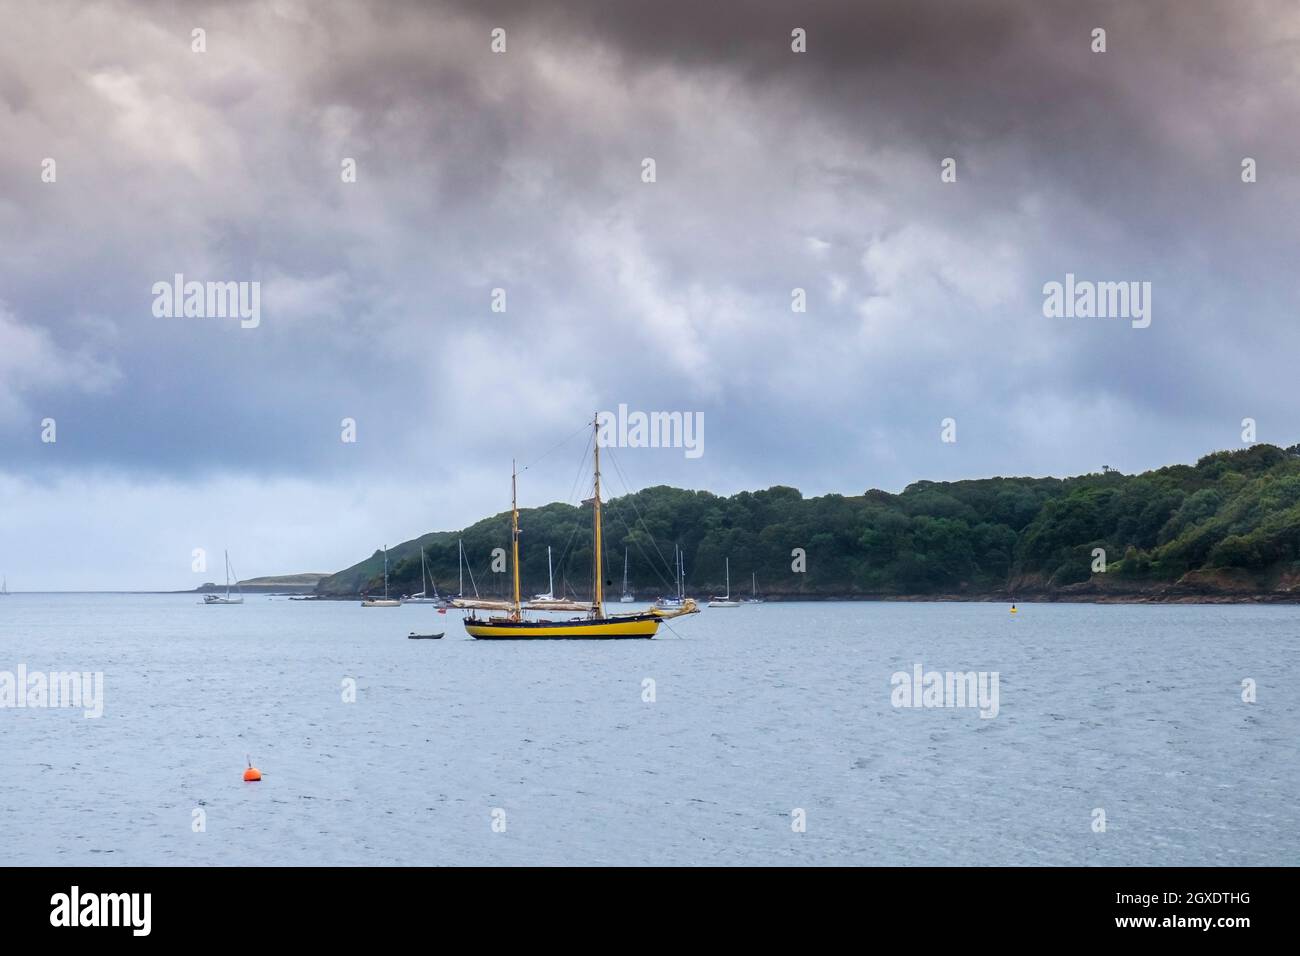 Gloomy cloudy weather over sailboats moored in the Helford River Passage in Cornwall. Stock Photo